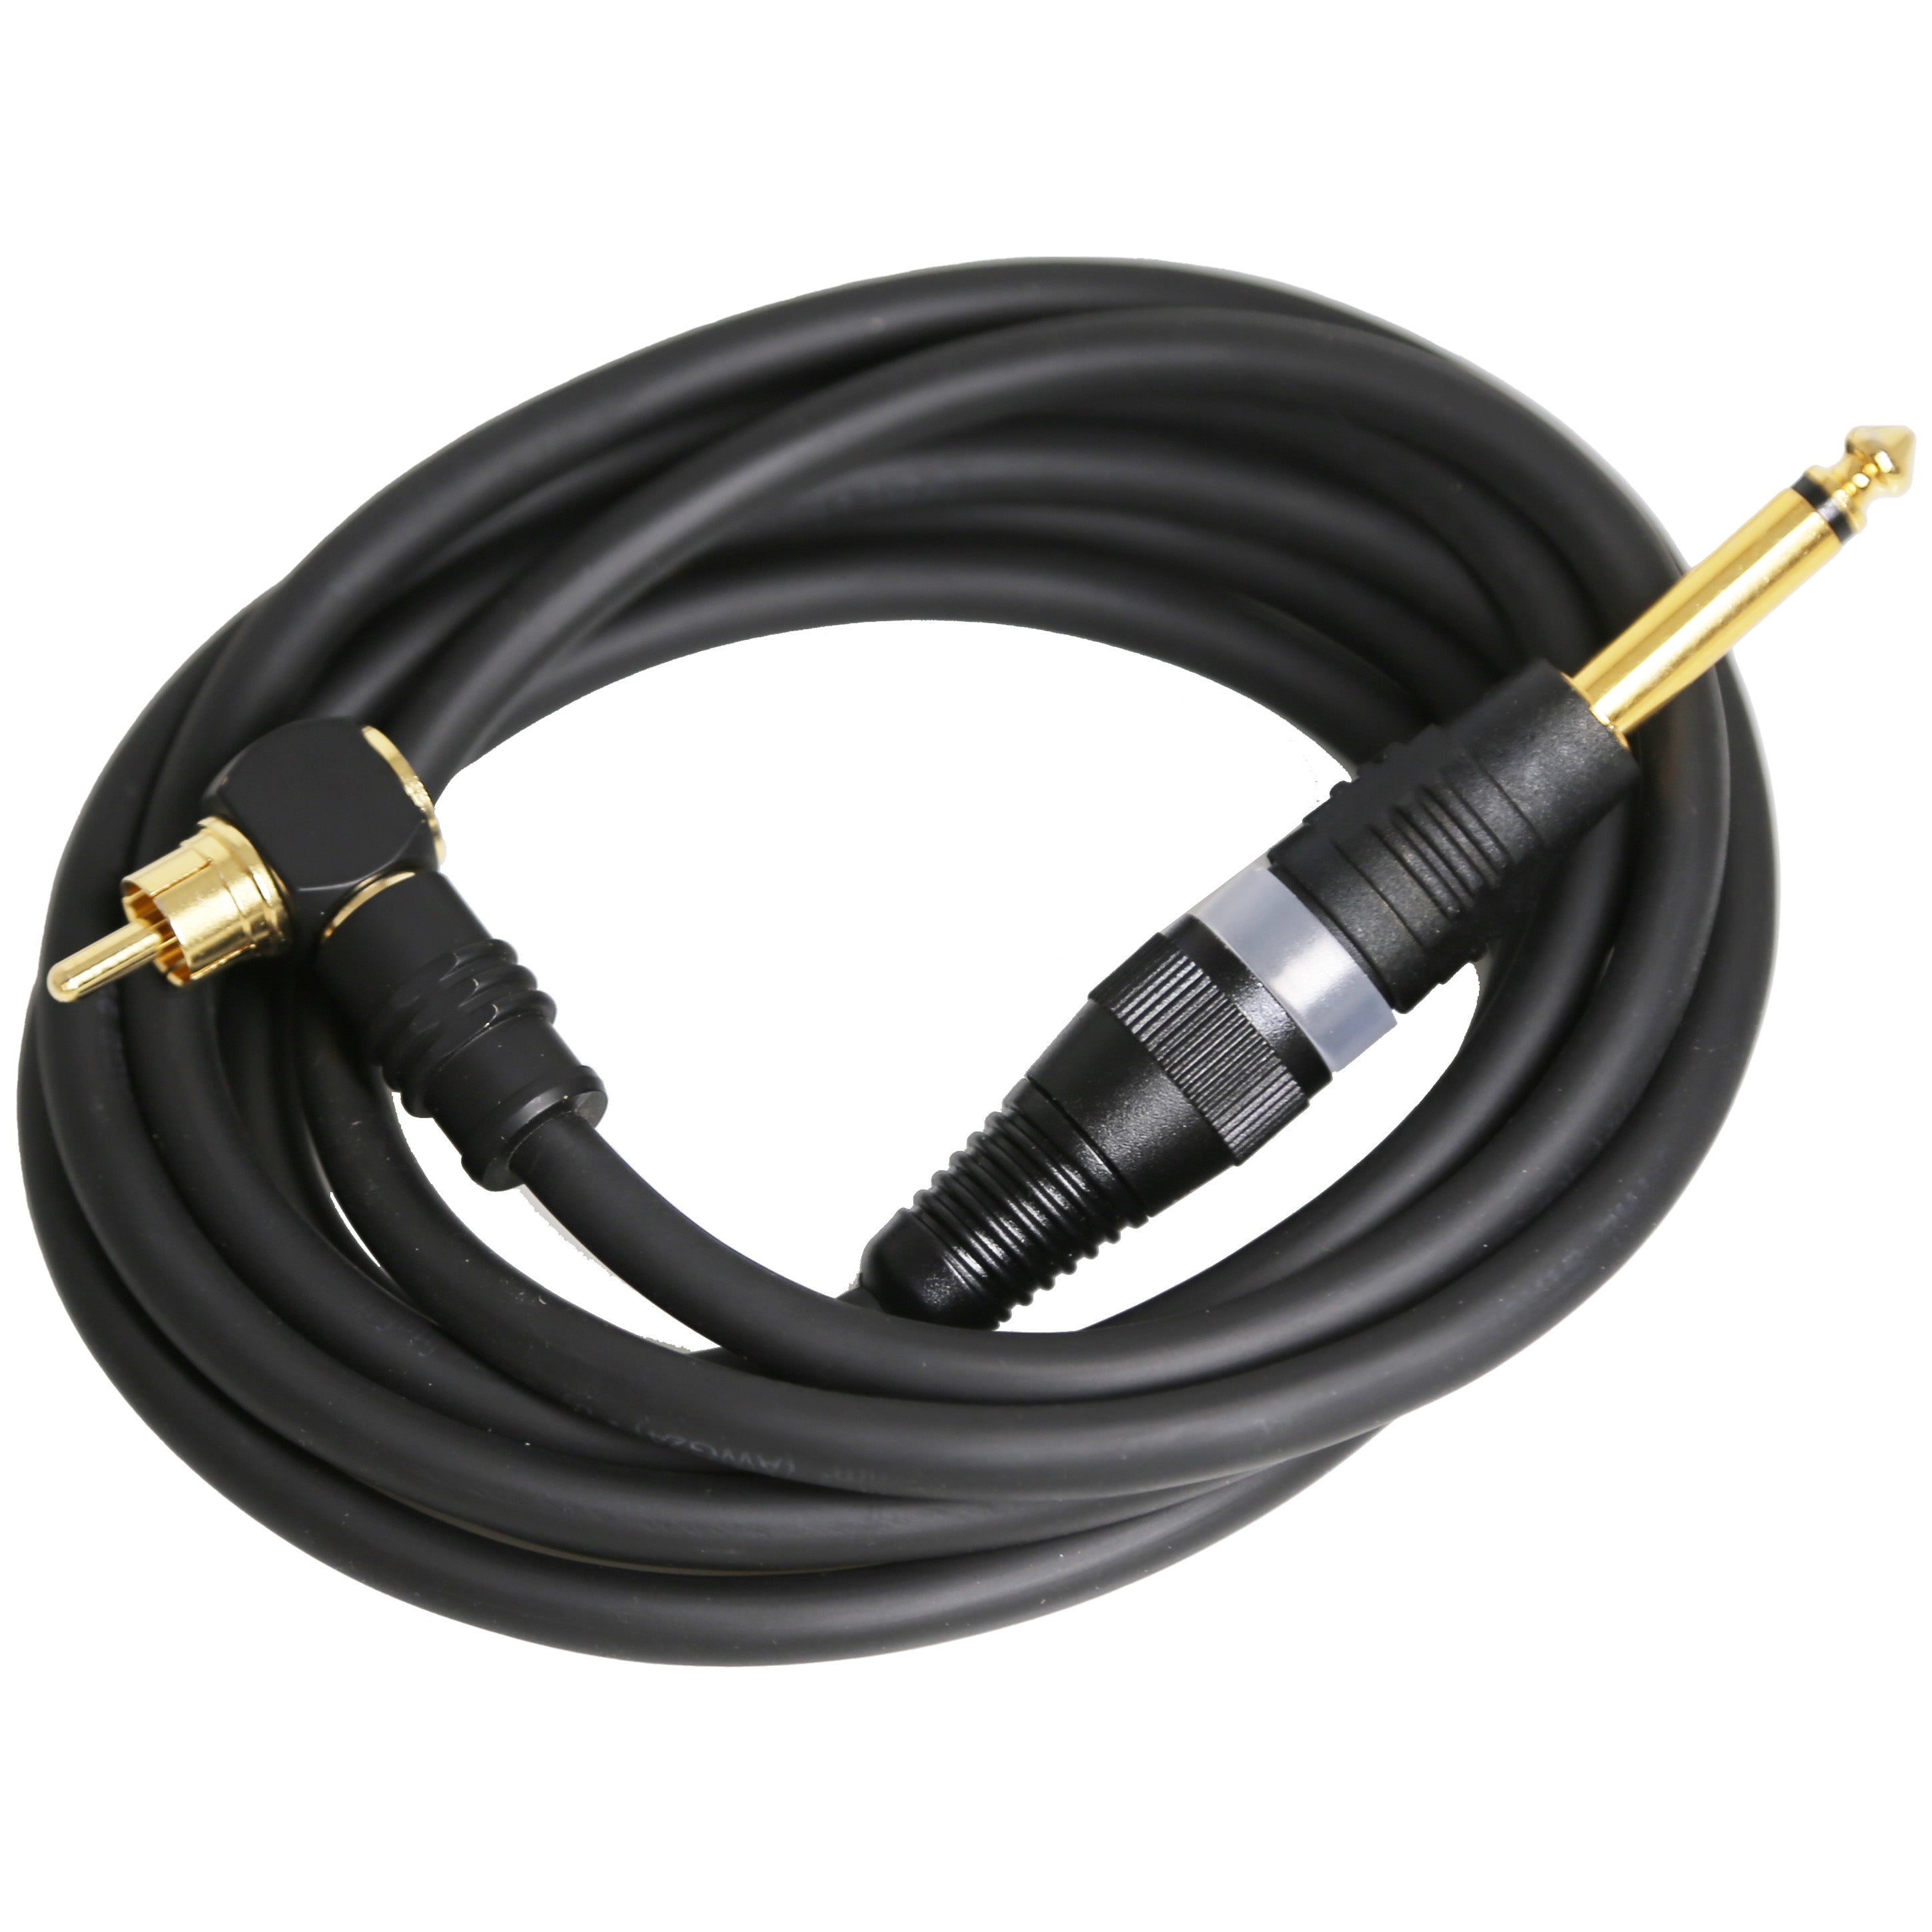 Angled Black Heavy Duty RCA Cable by Hardcraft Co.